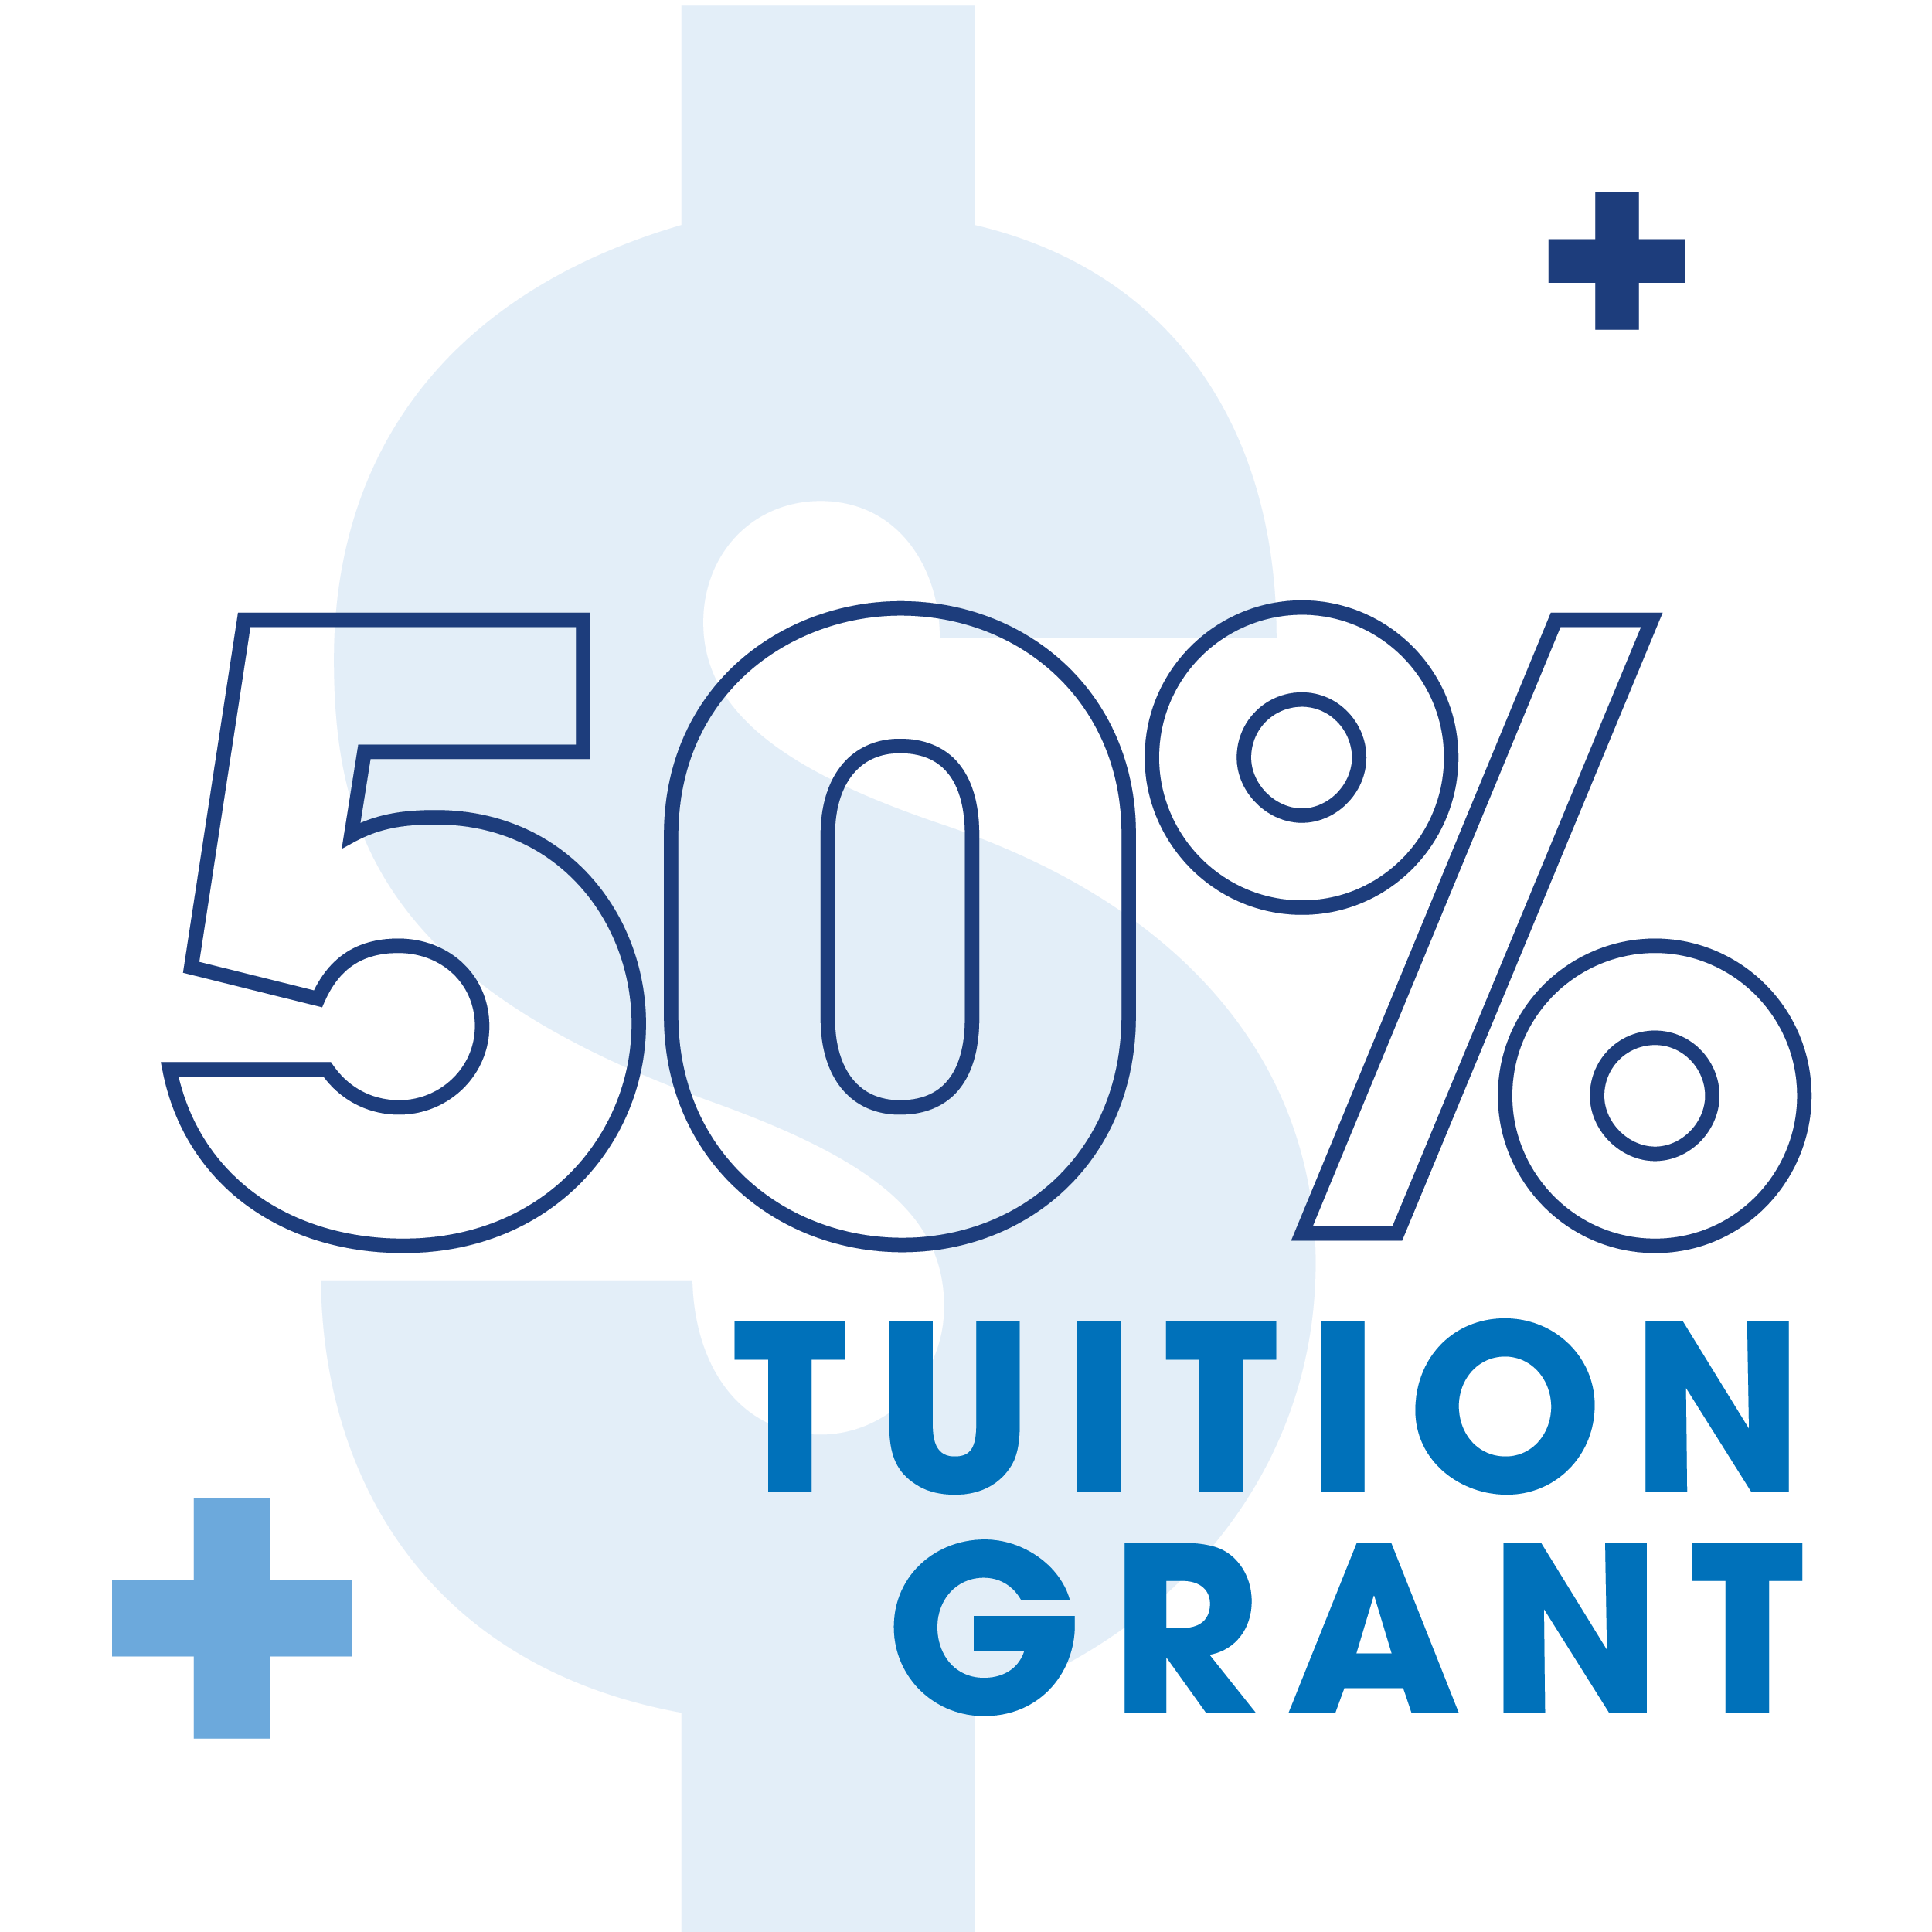 50% Tuition Grant